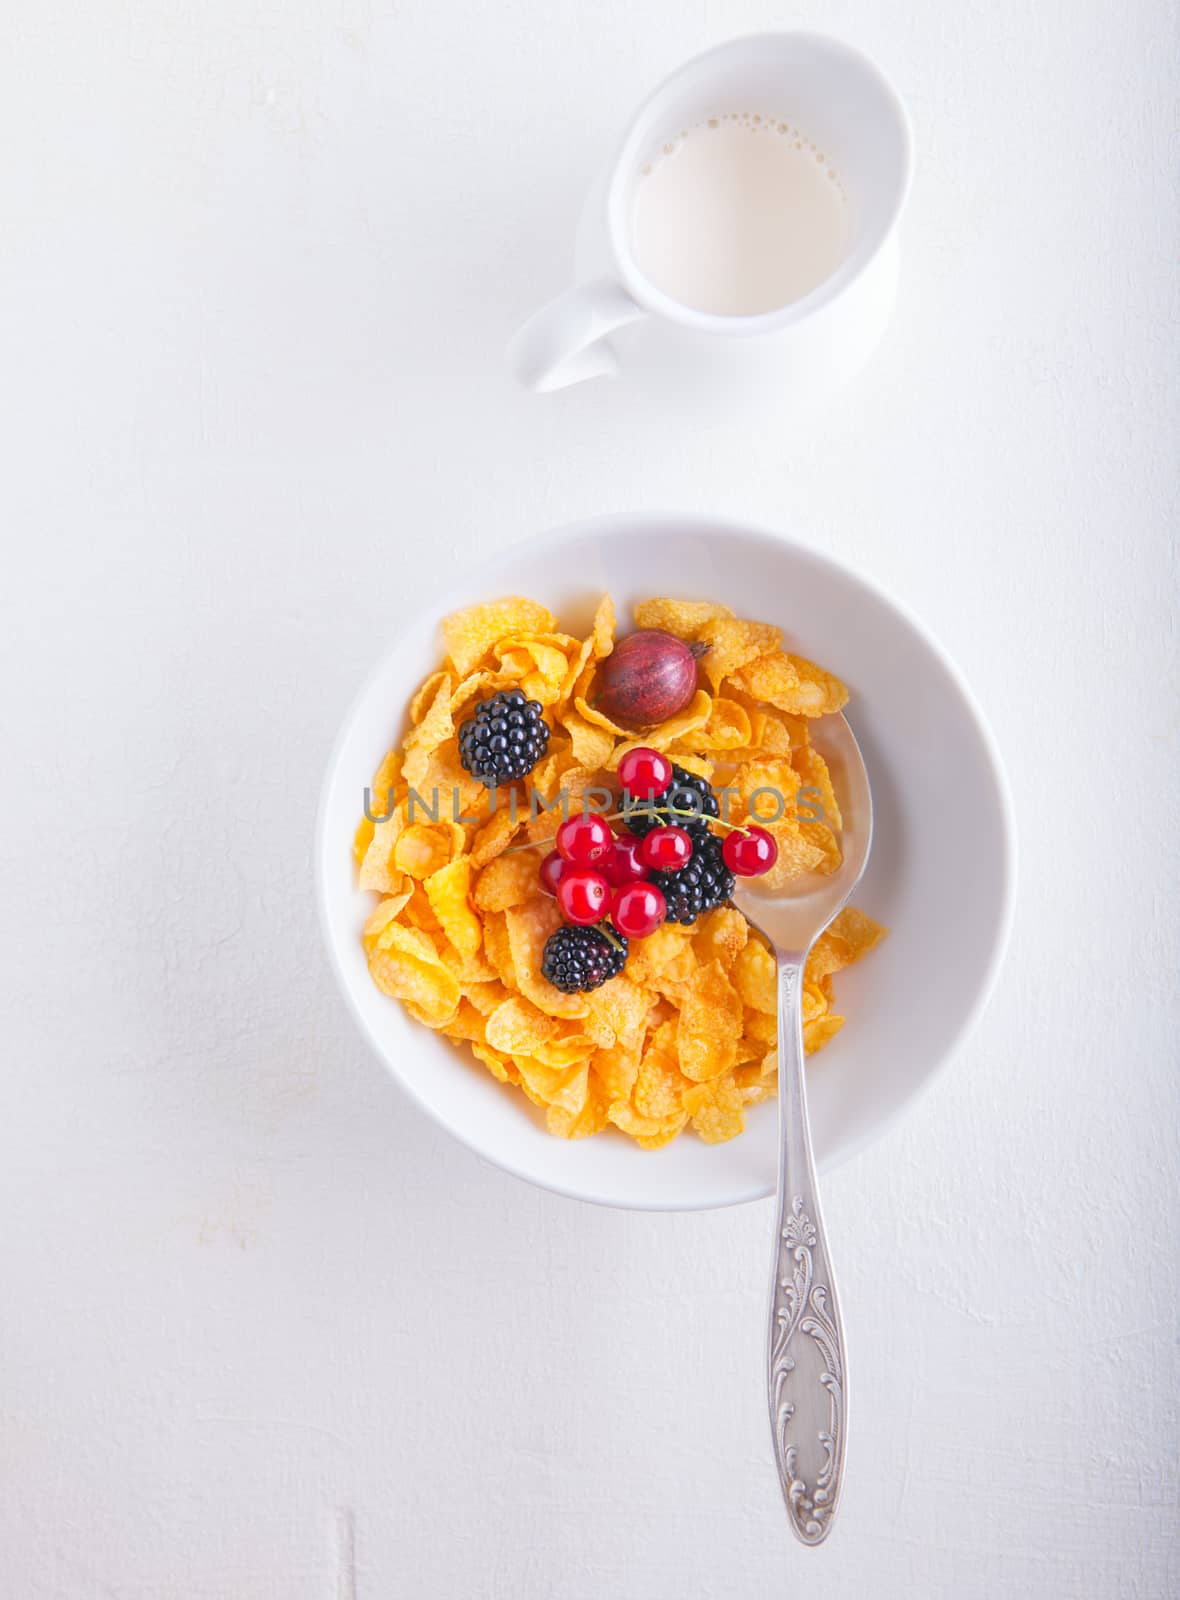 Corn Flakes with berries by supercat67